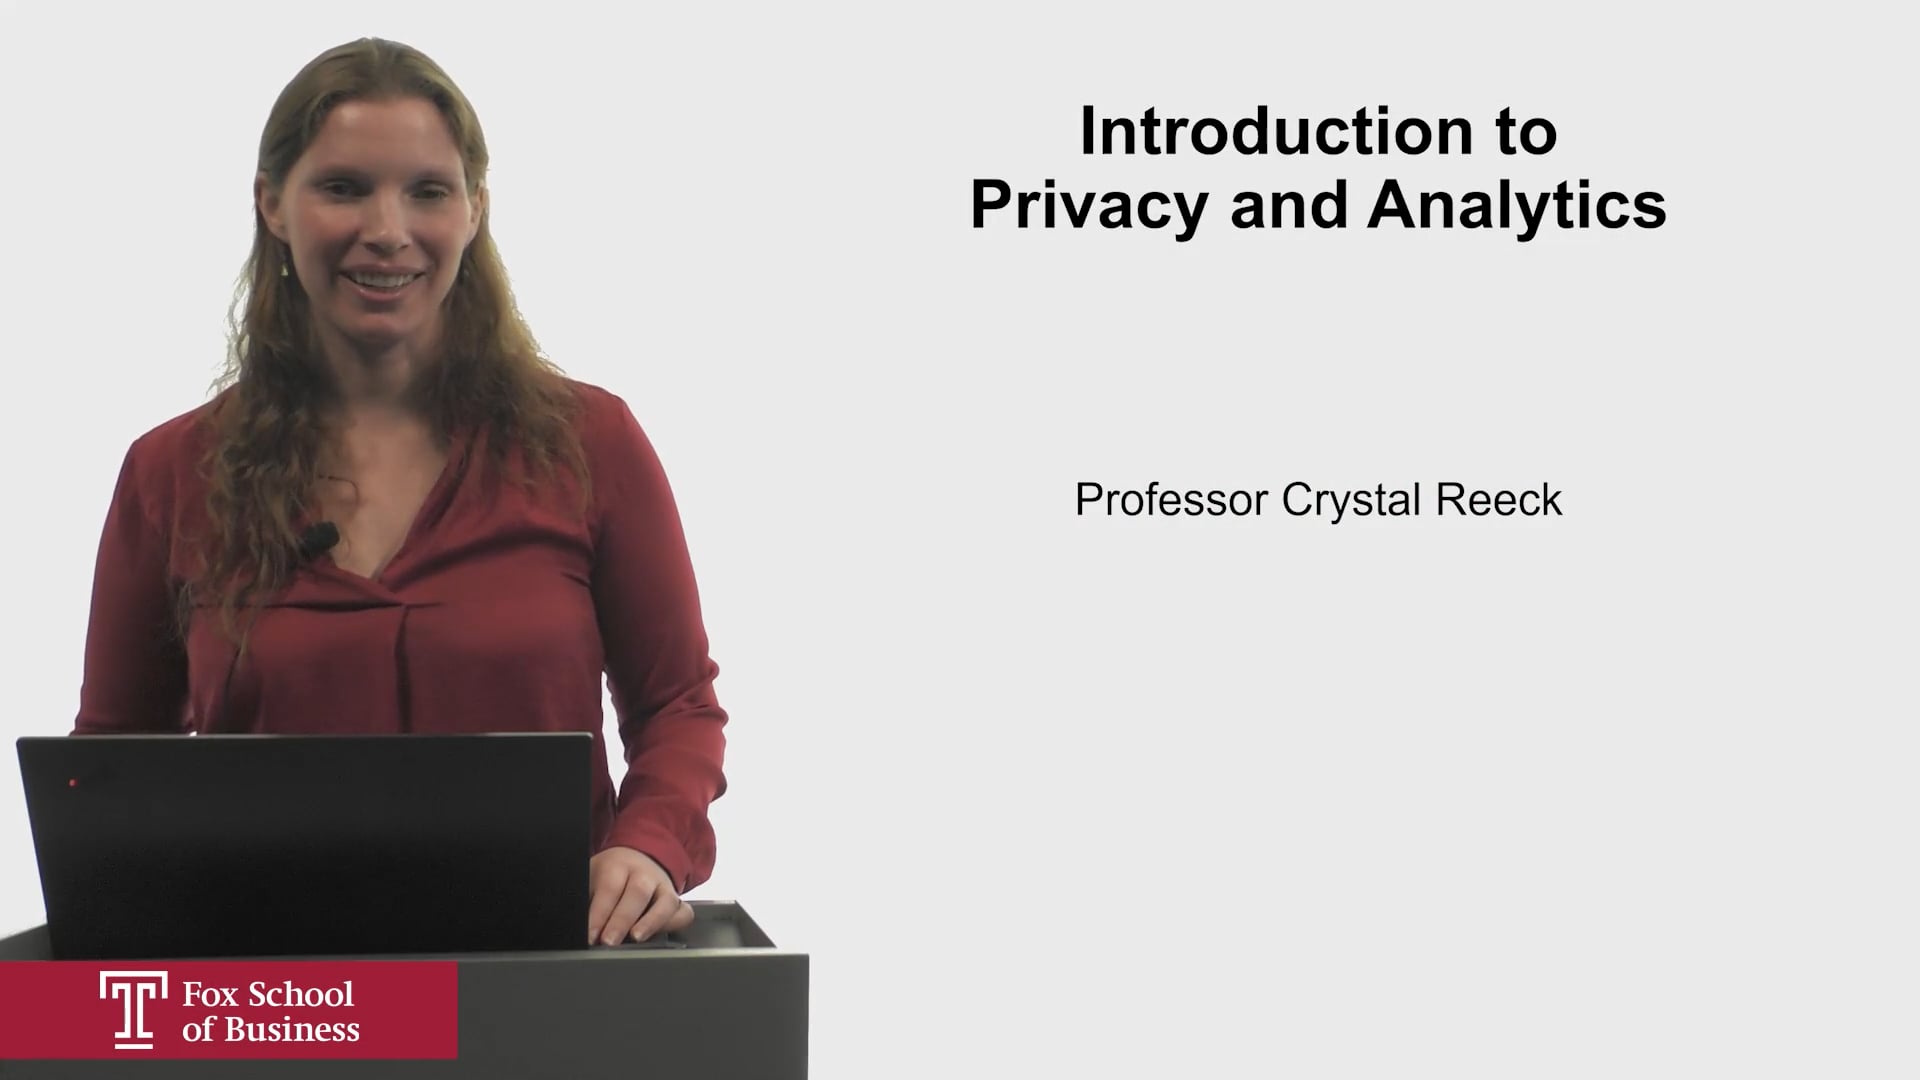 Introduction to Privacy and Analytics